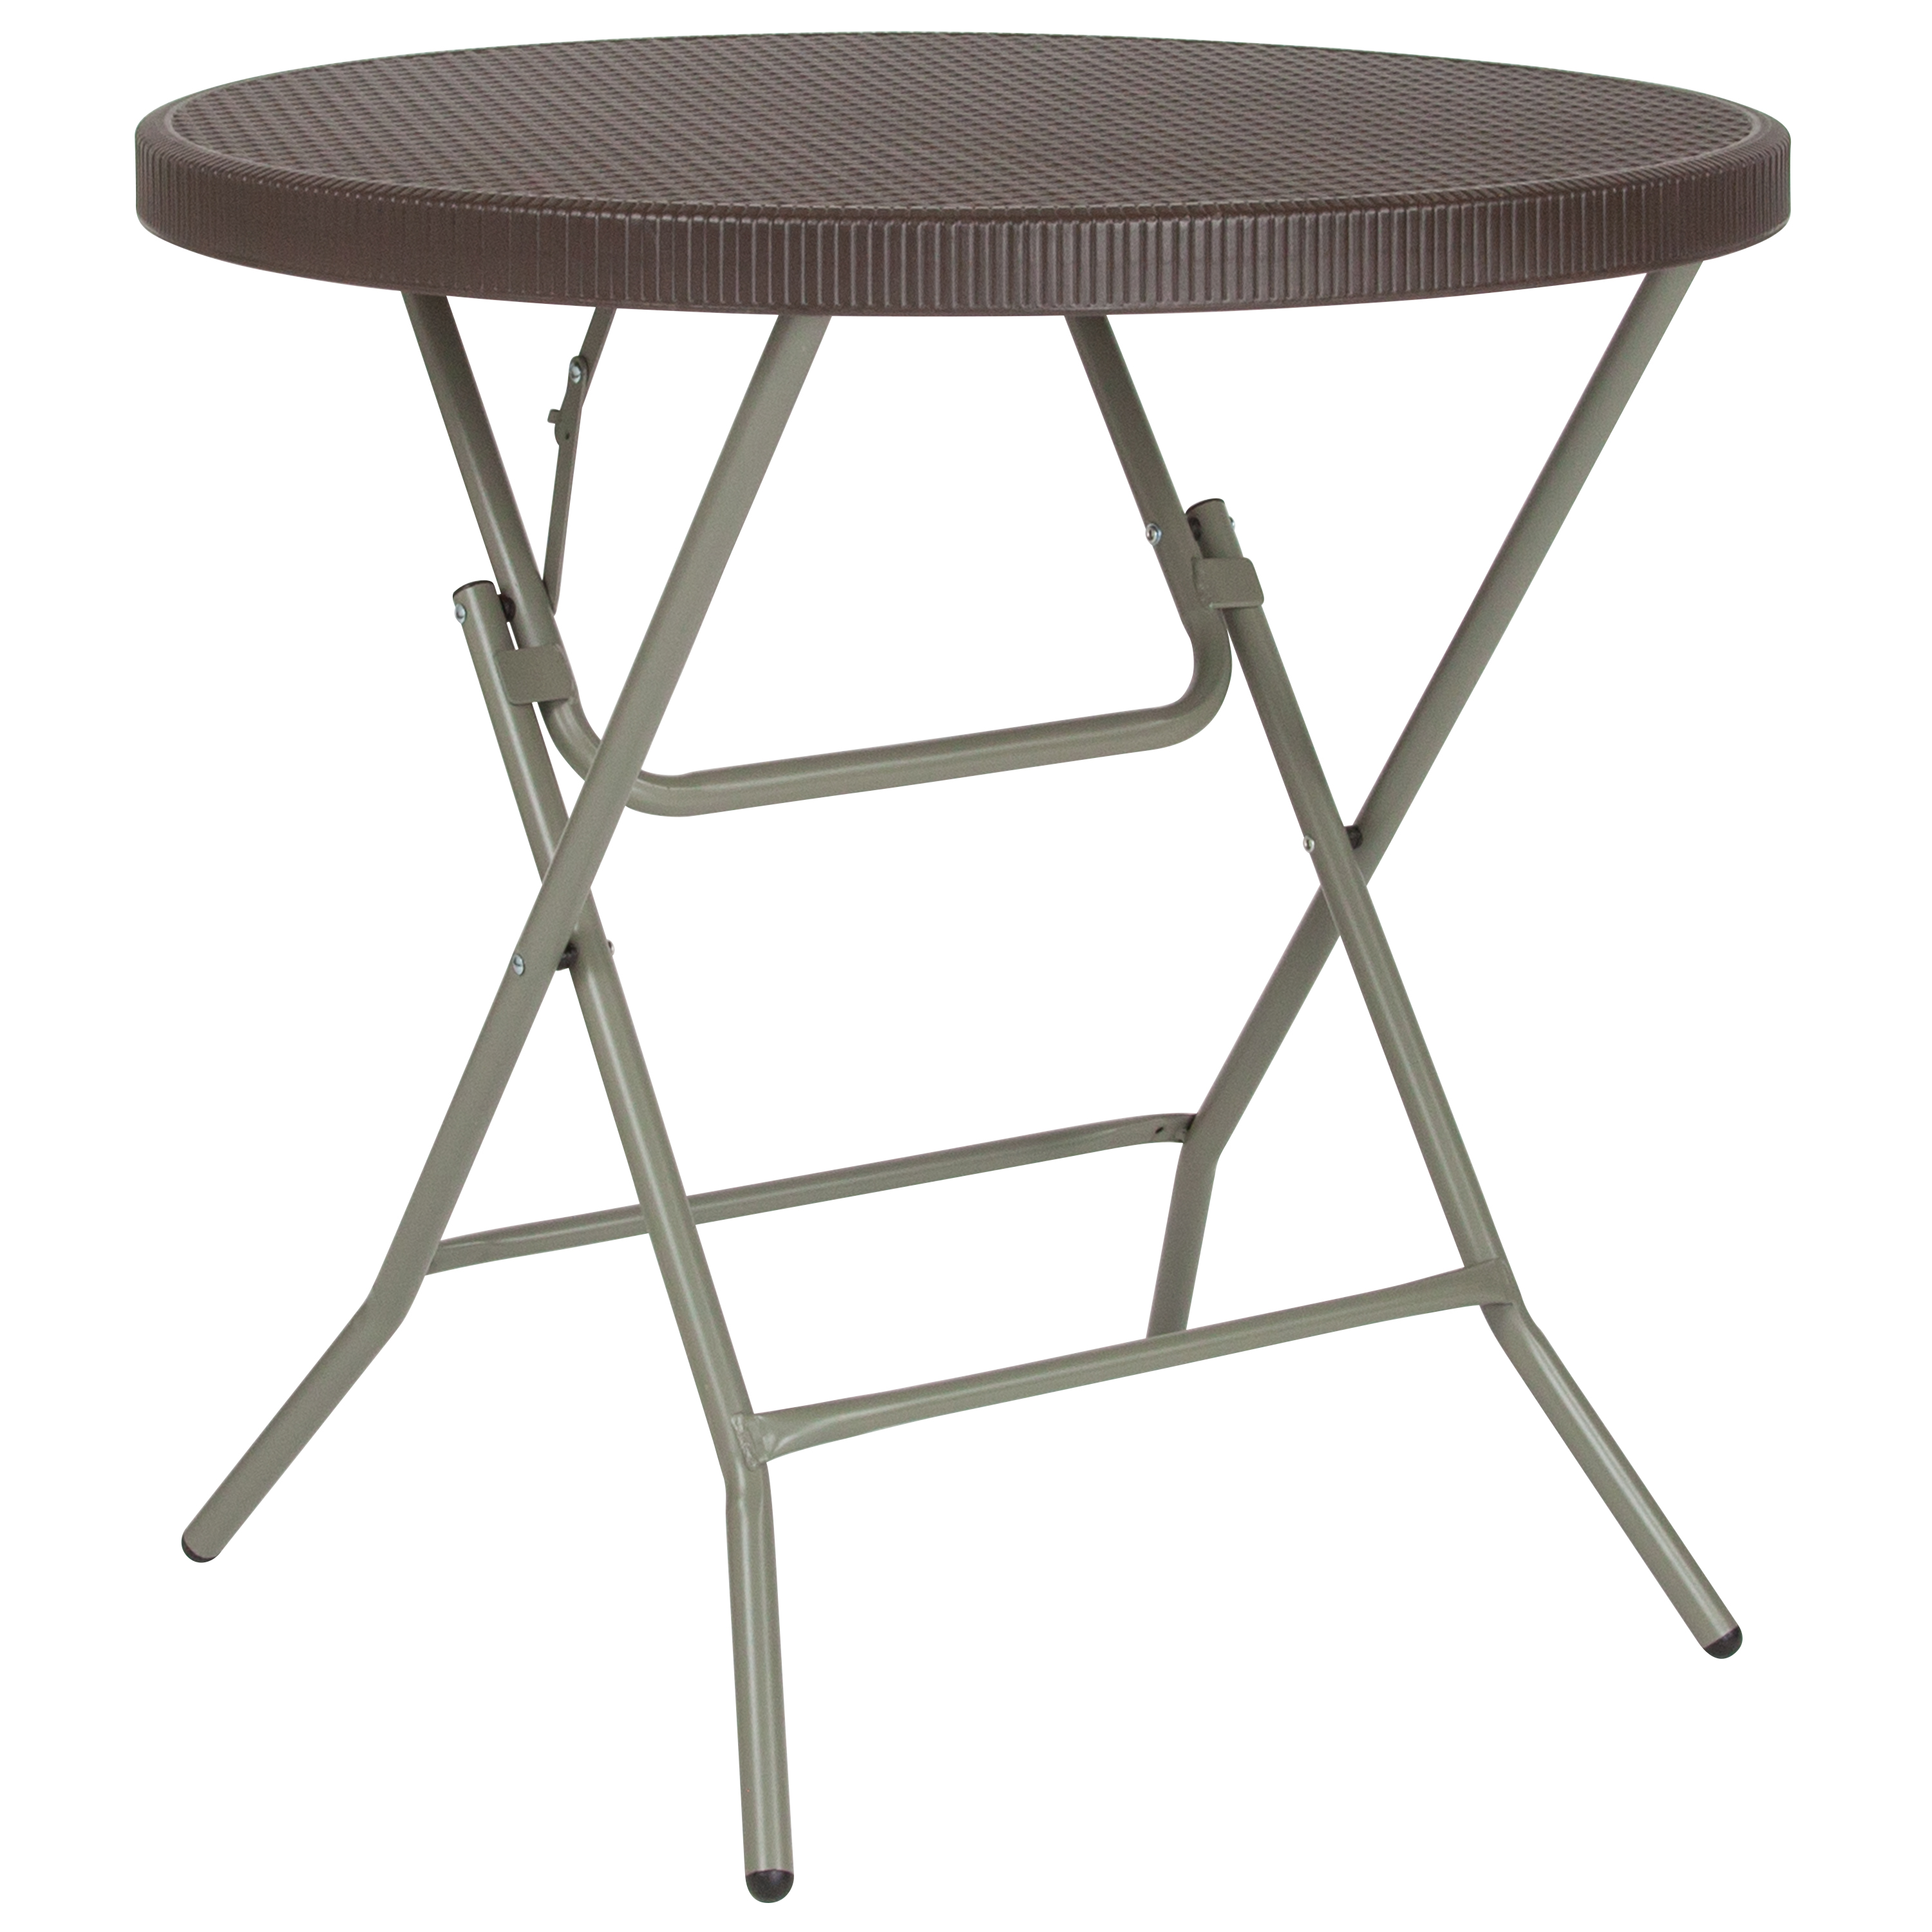 Flash Furniture DAD-FT-80R-GG 2.6' Round Brown Rattan Plastic Folding Table